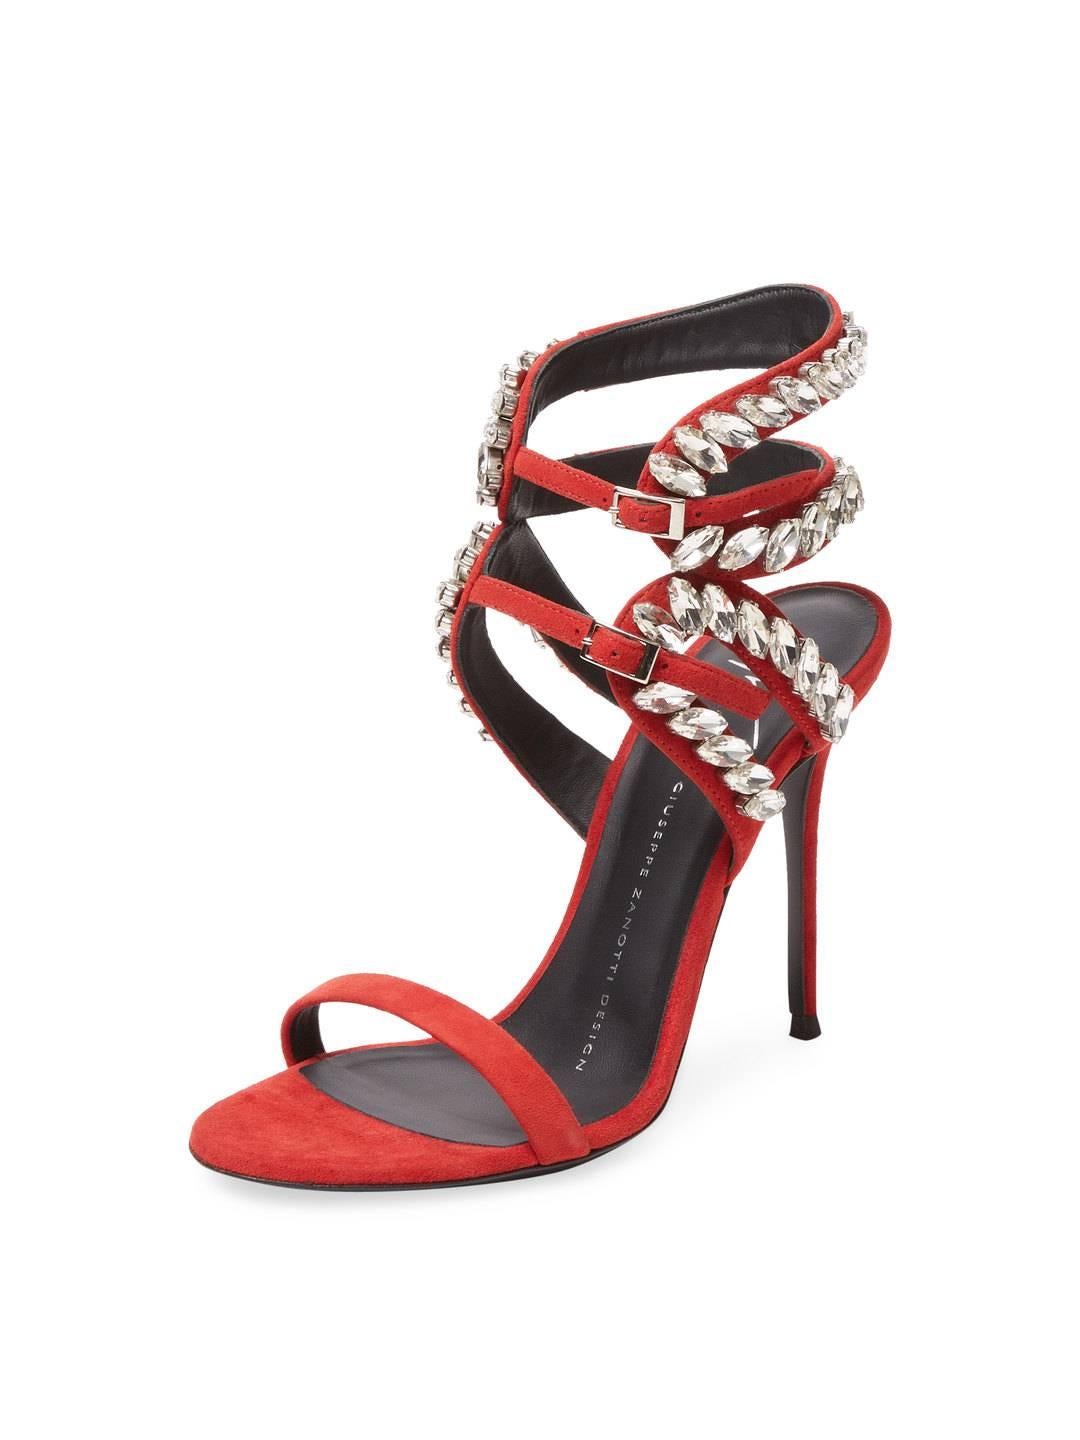 LAST PAIR!  Giuseppe Zanotti New Sold Out Red Suede Crystal Evening Sandals Heels in Box 

Size IT 36 - Not your size?  Contact us to help you find yours.
Suede
Crystal
Ankle buckle closure
Made in Italy
Heel height 4.5